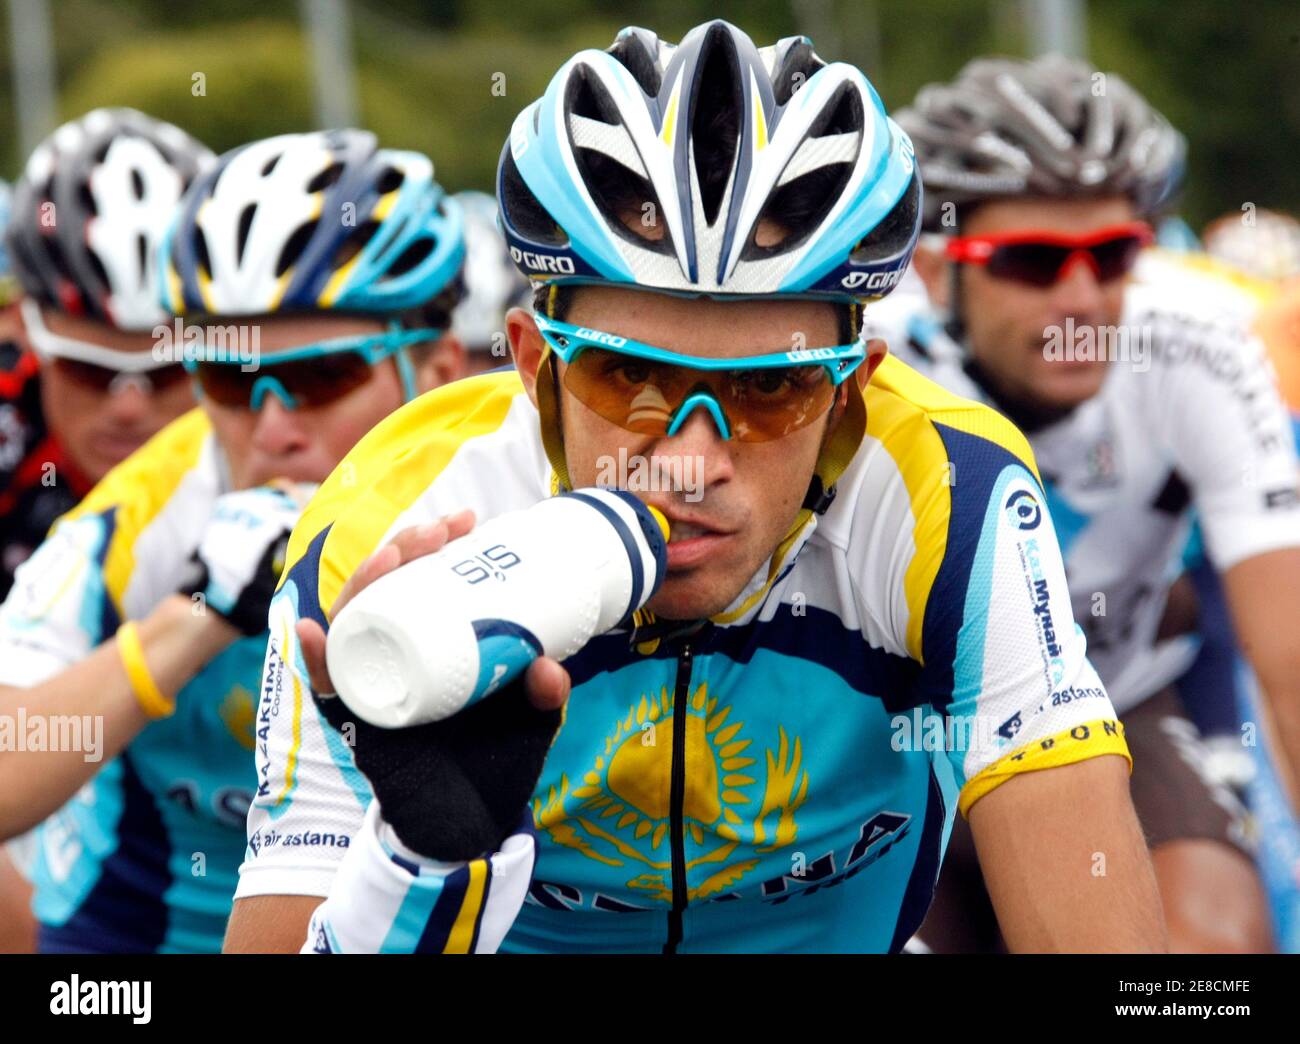 Astana rider Alberto Contador of Spain drinks as he cycles during the tenth  stage of the 96th Tour de France cycling race between Limoges and Issoudun,  July 14, 2009. Lance Armstrong warned